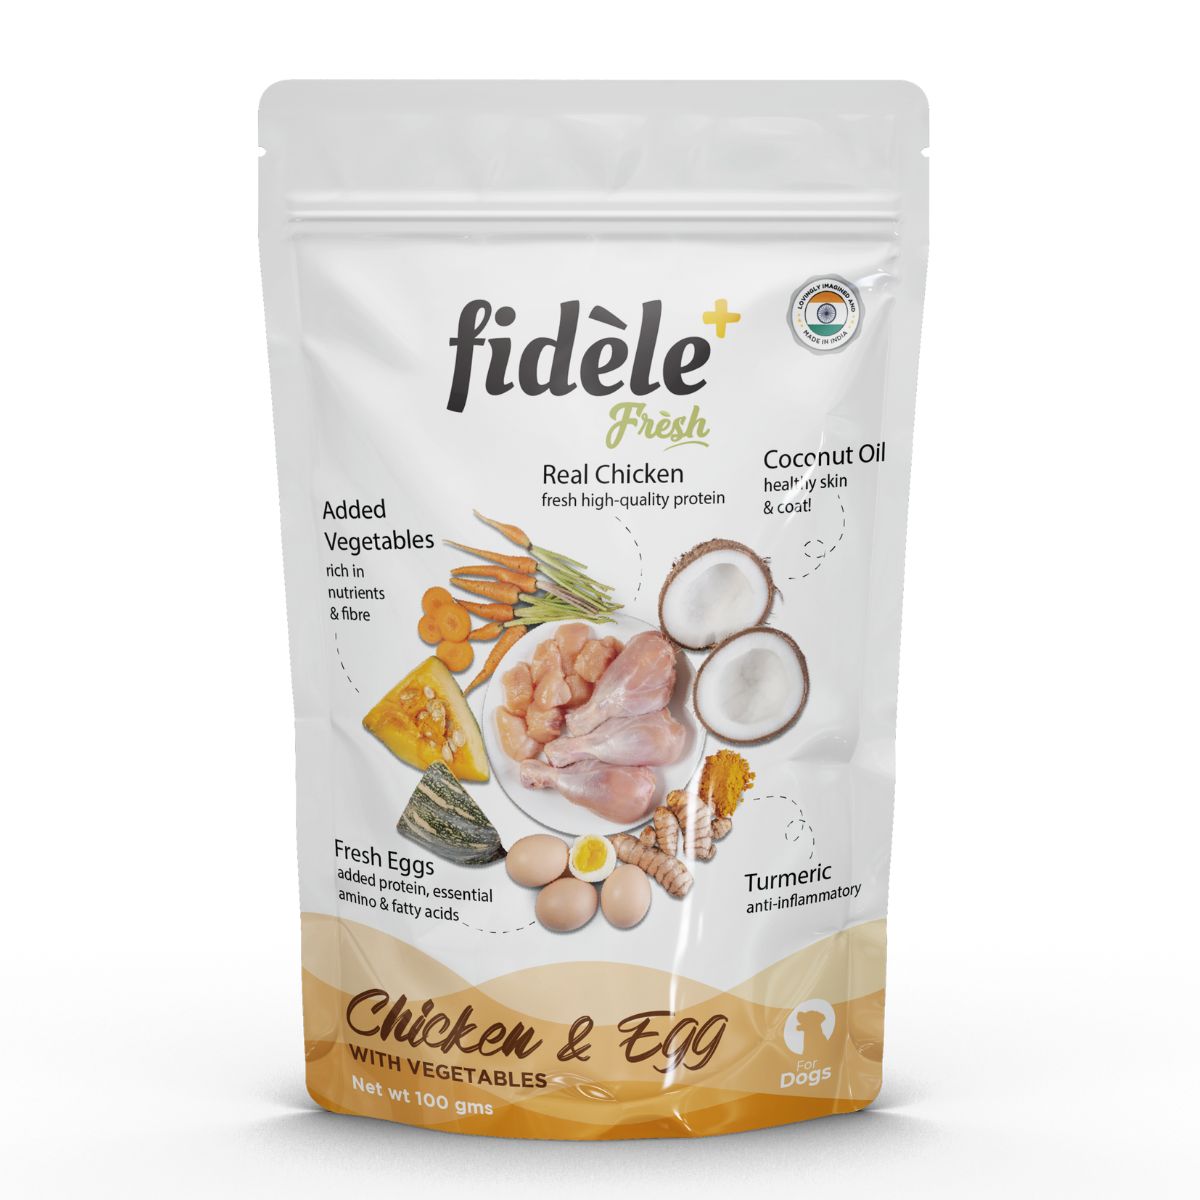 Fidele+ Wet Dog Food Fresh Chicken & Egg With Vegetables 100g Pouch Pack of 12